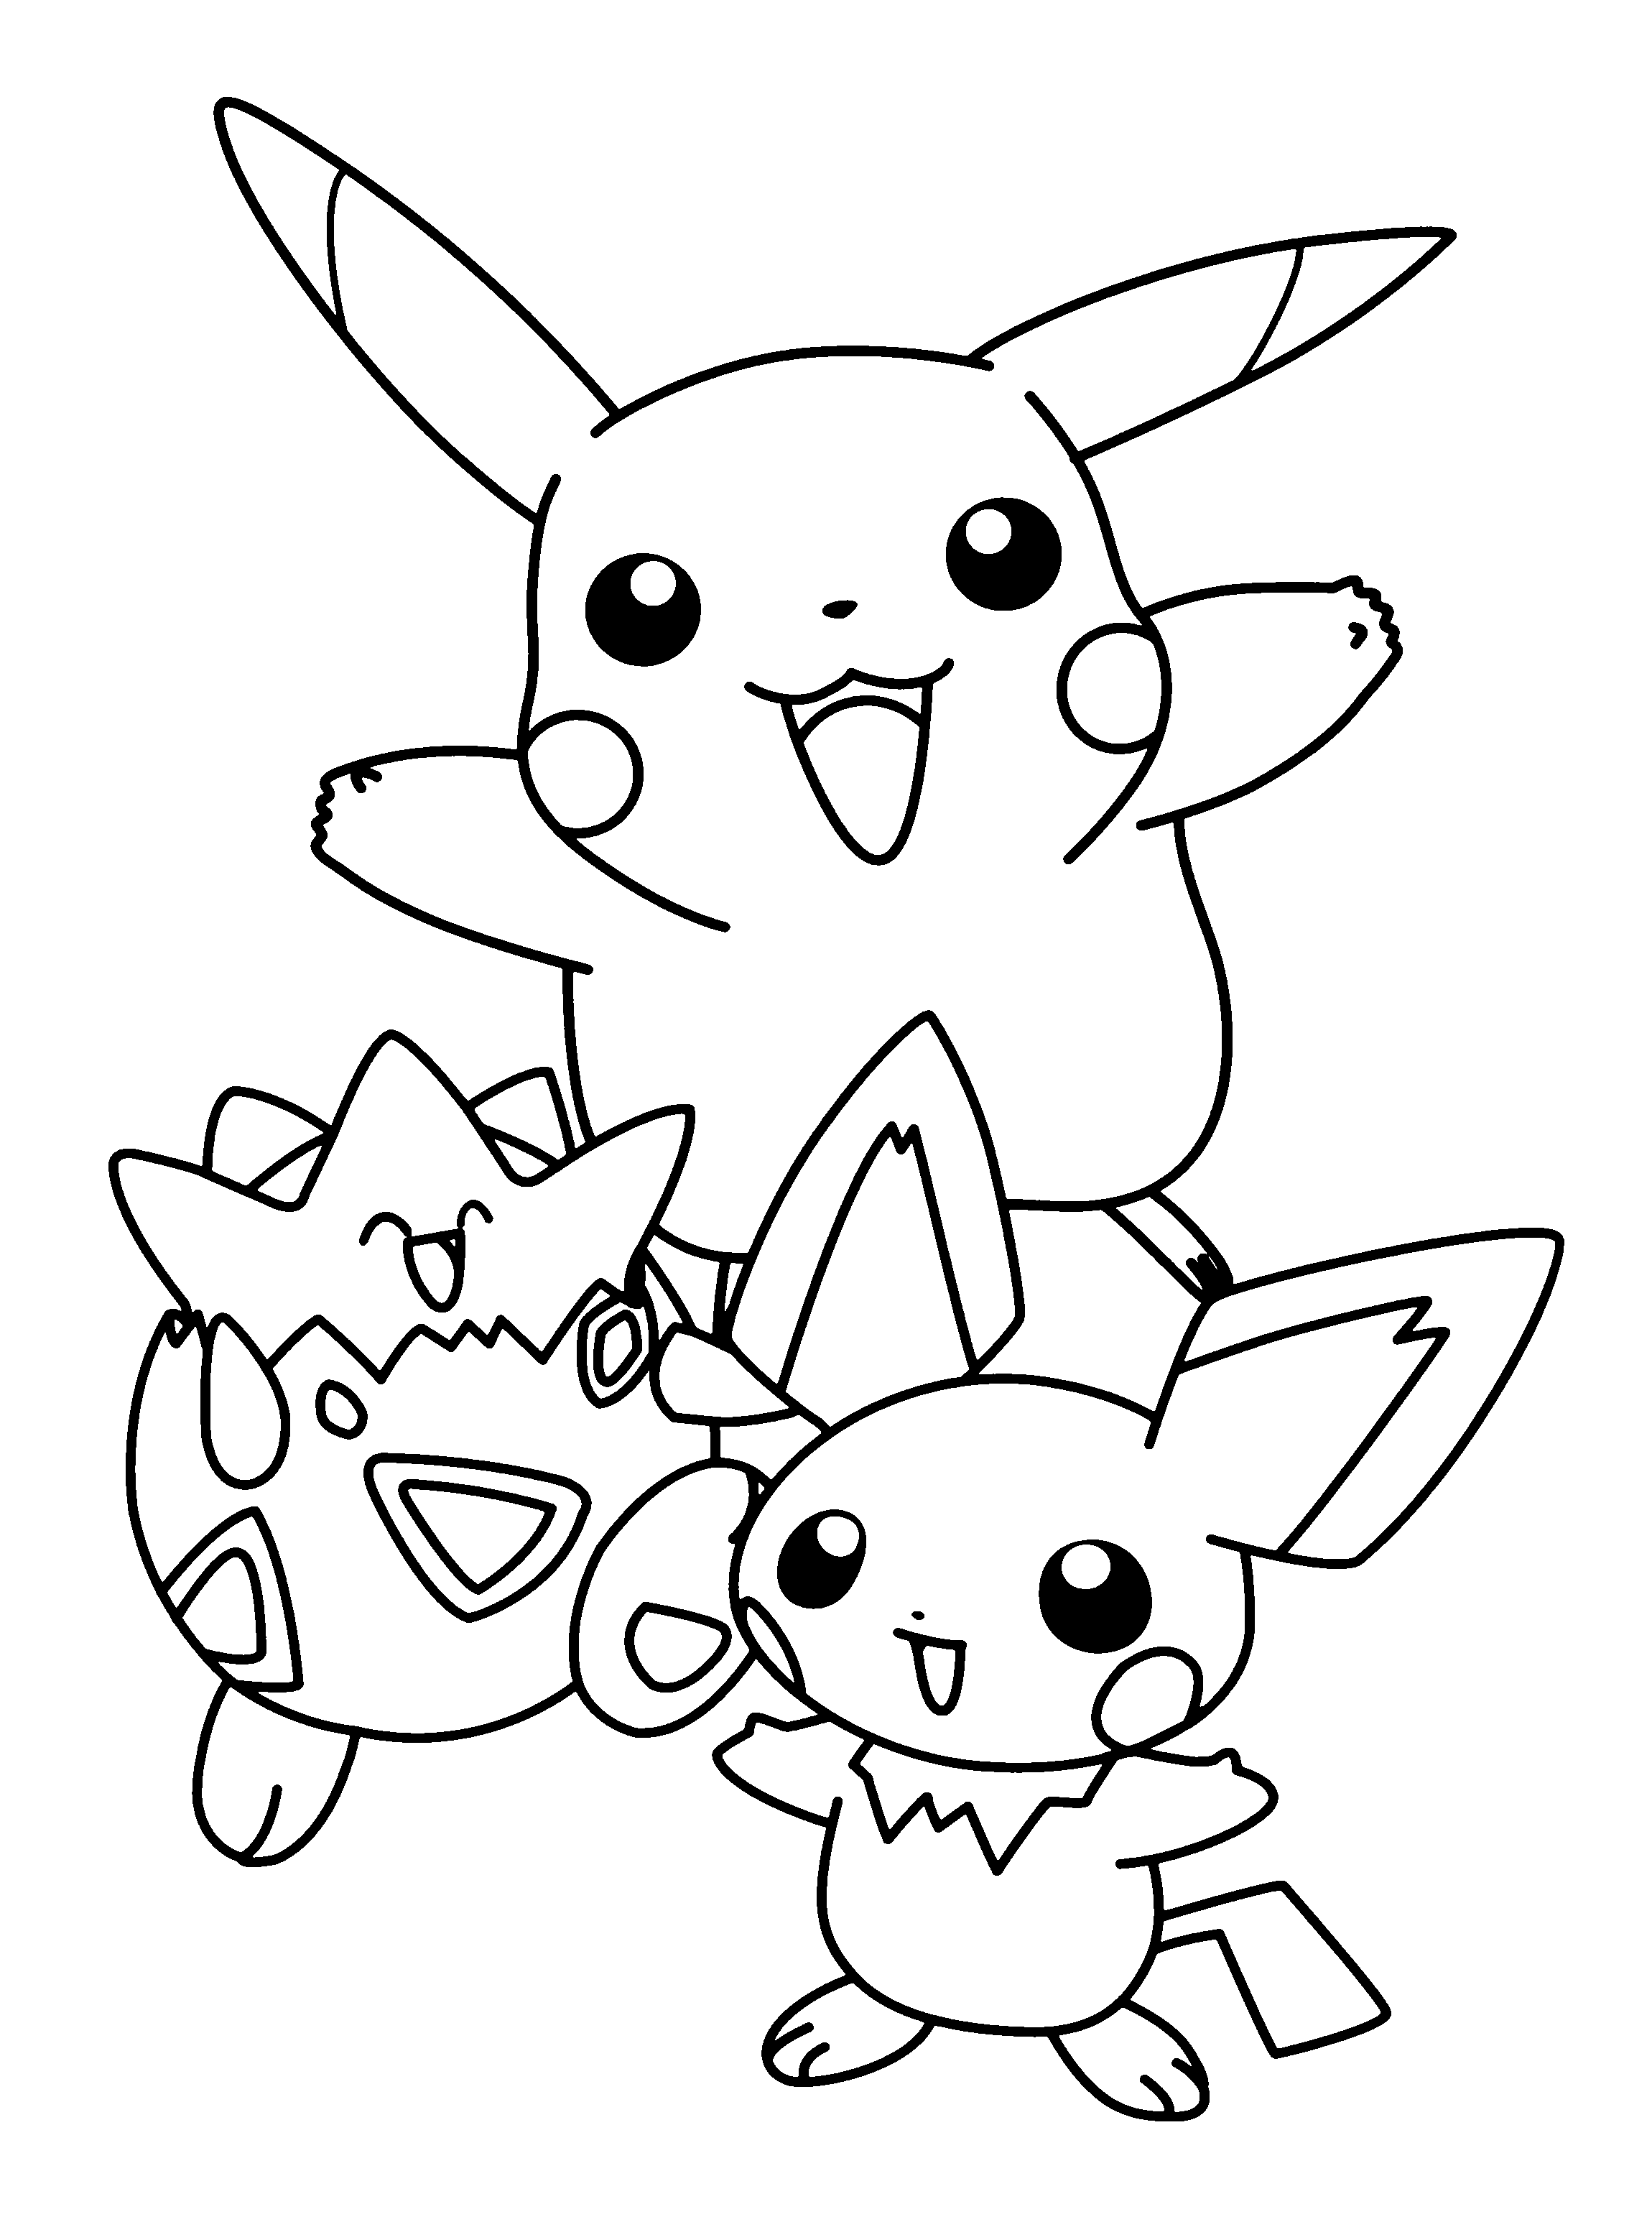 pokemon colouring pages online free pokemon coloring pages download pokemon images and print colouring pokemon online pages free 